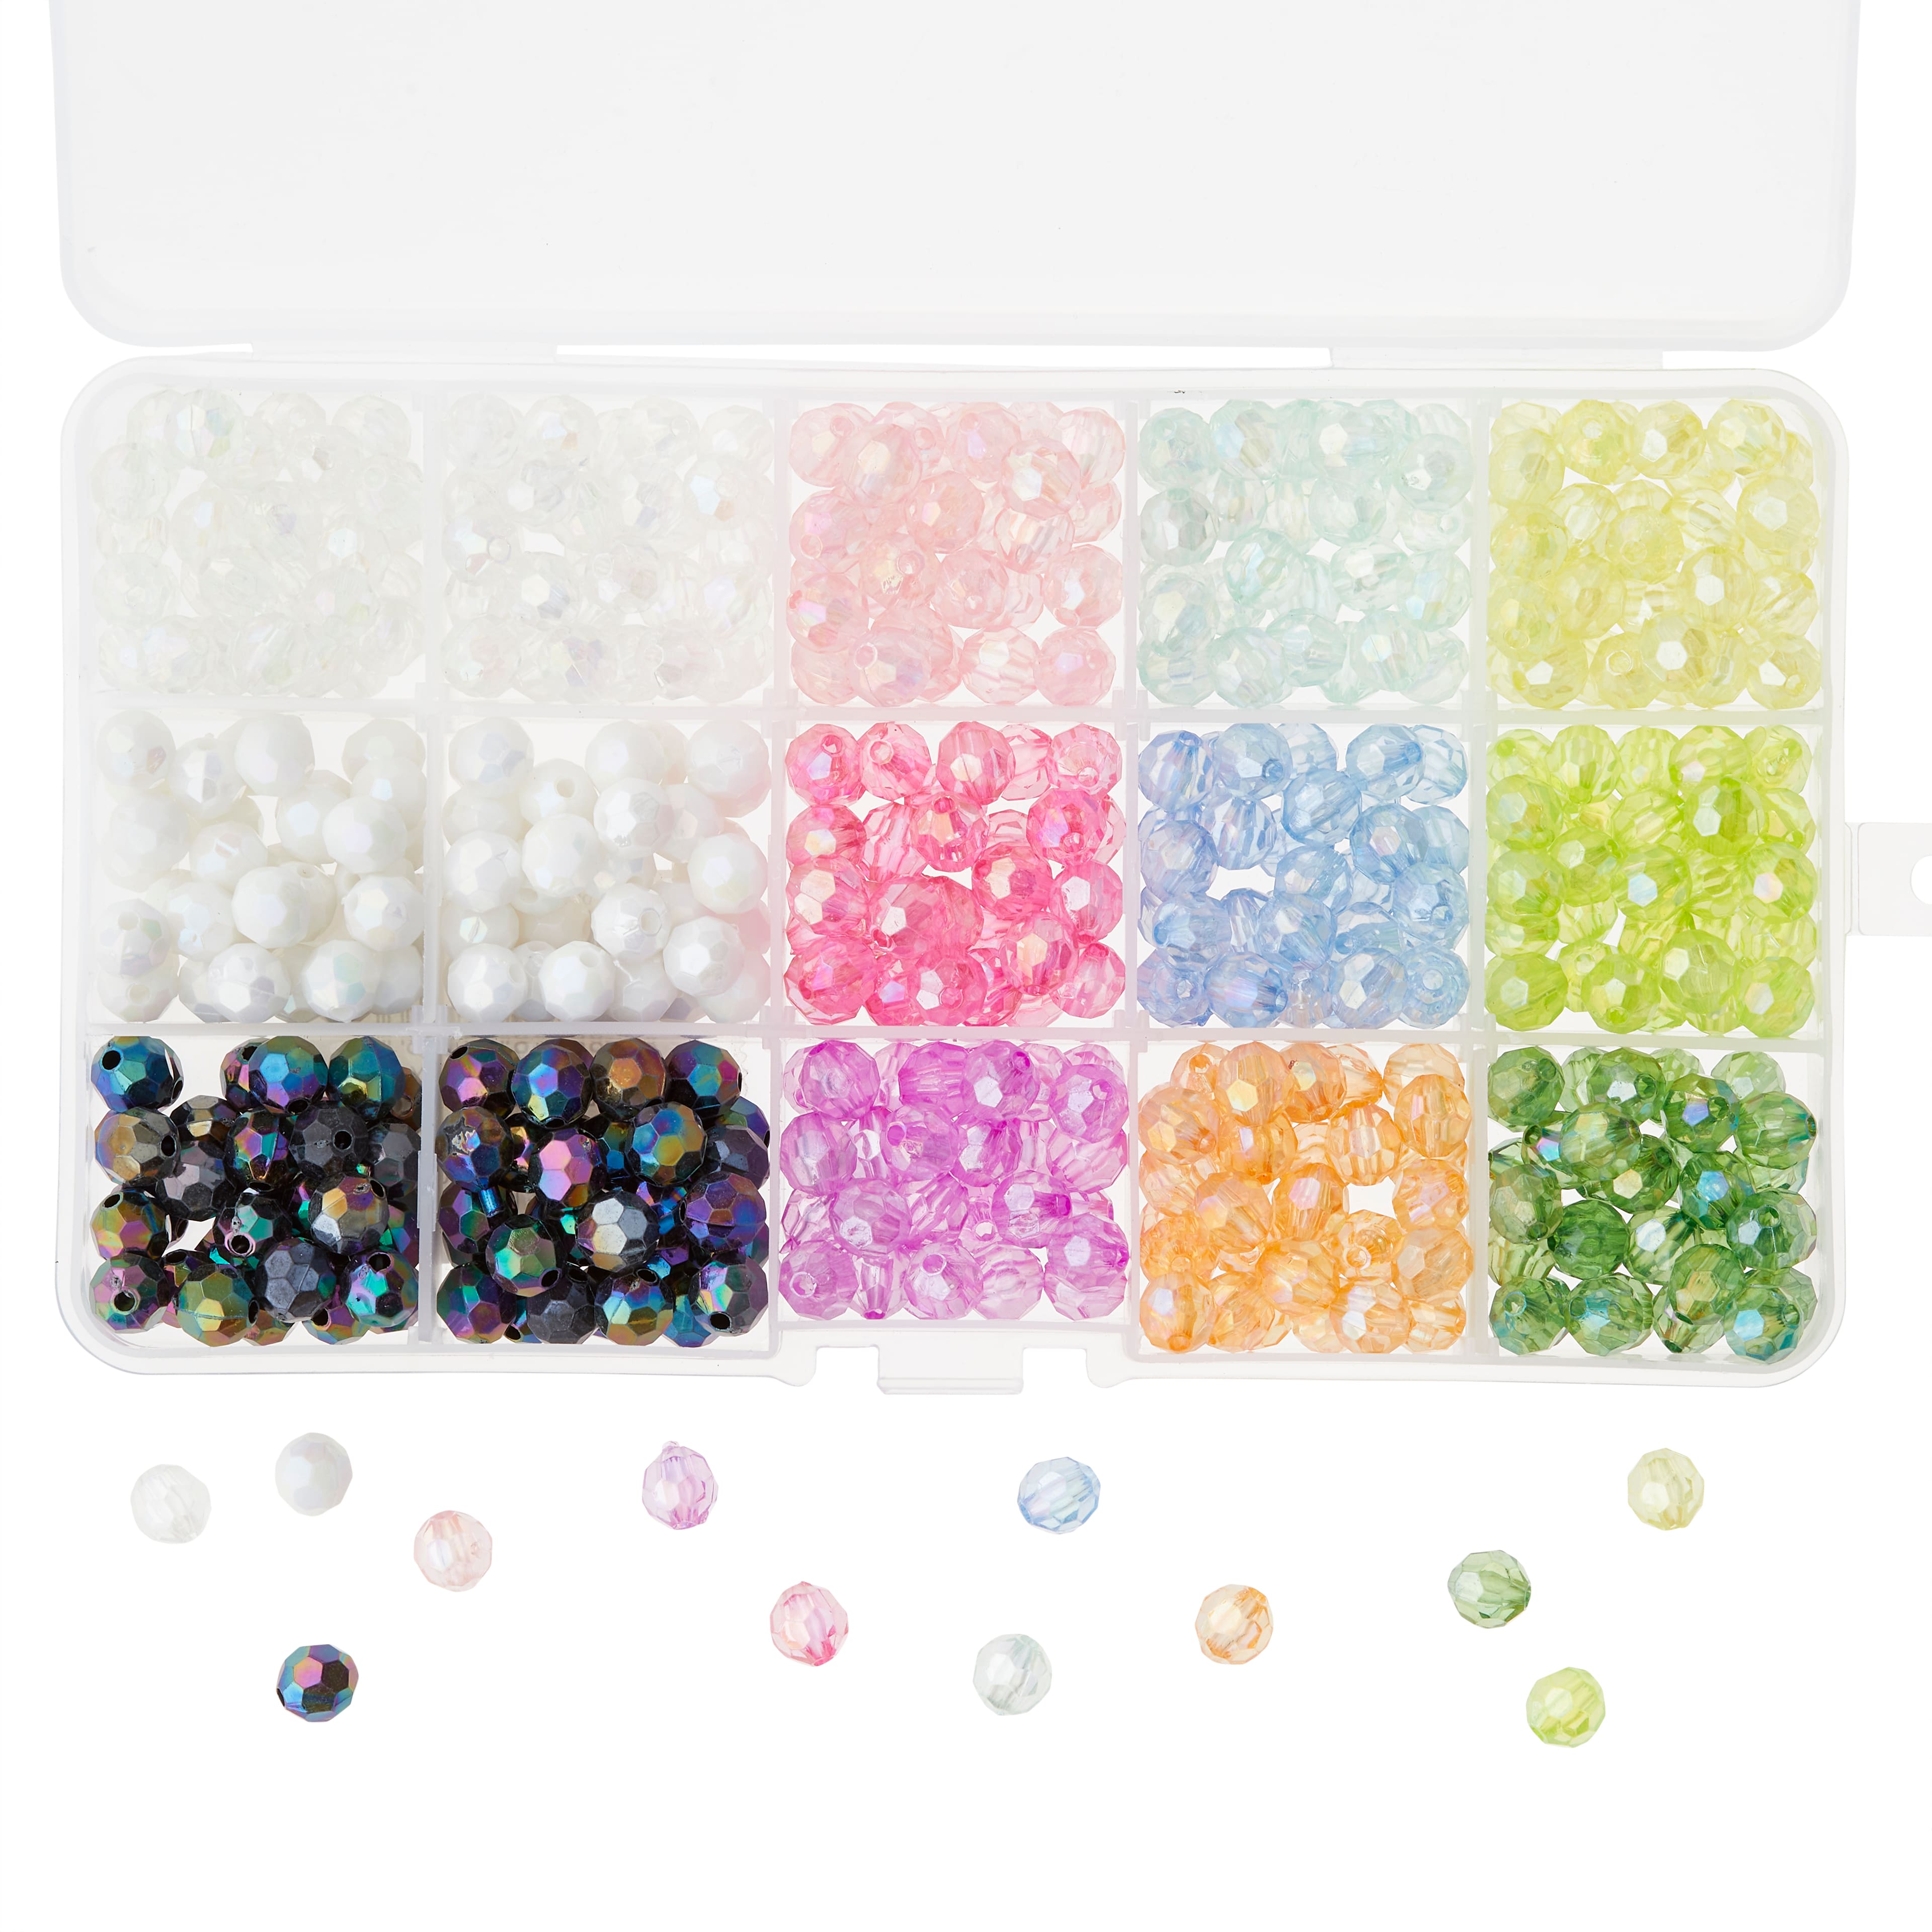 Bead Kit, 10 color crackle bead set, 4mm crackle beads, bead